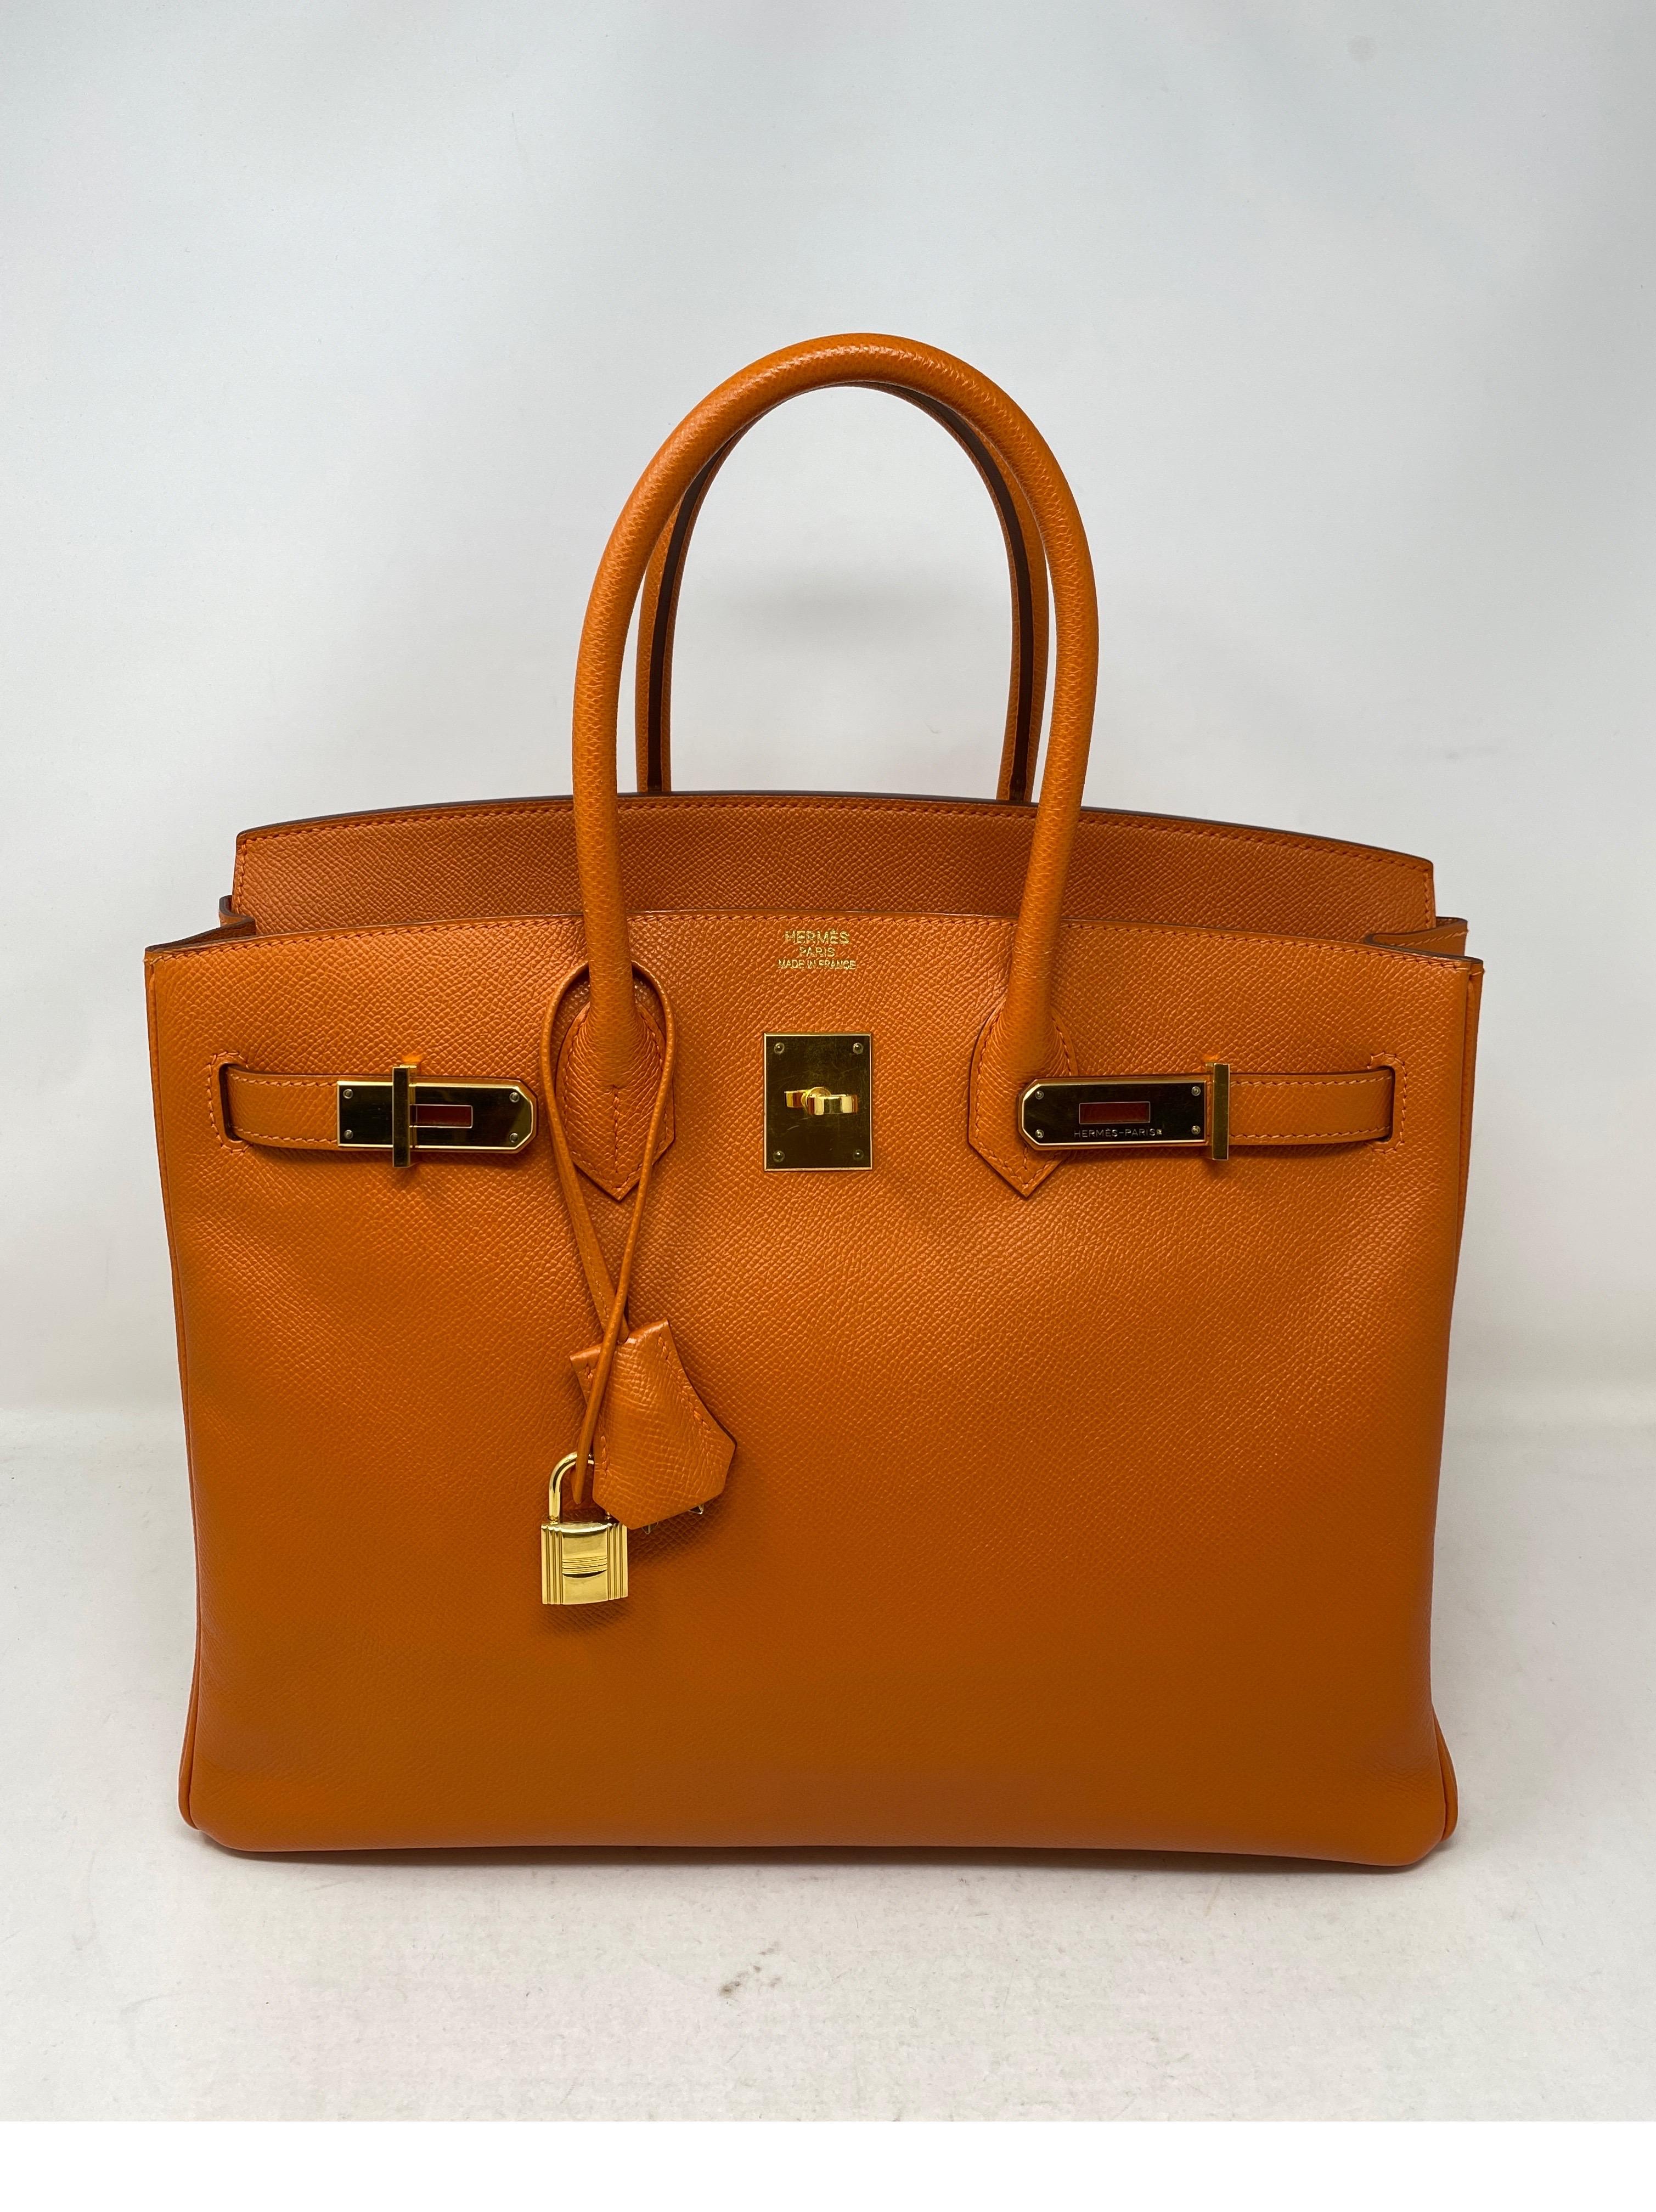 Hermes Orange Birkin 35 Bag. Gold hardware. Excellent condition. Looks like new. Epsom leather. Most wanted orange and gold combination. Gorgeous bag. Includes clochette, lock, keys, and dust cover. Guaranteed authentic. 